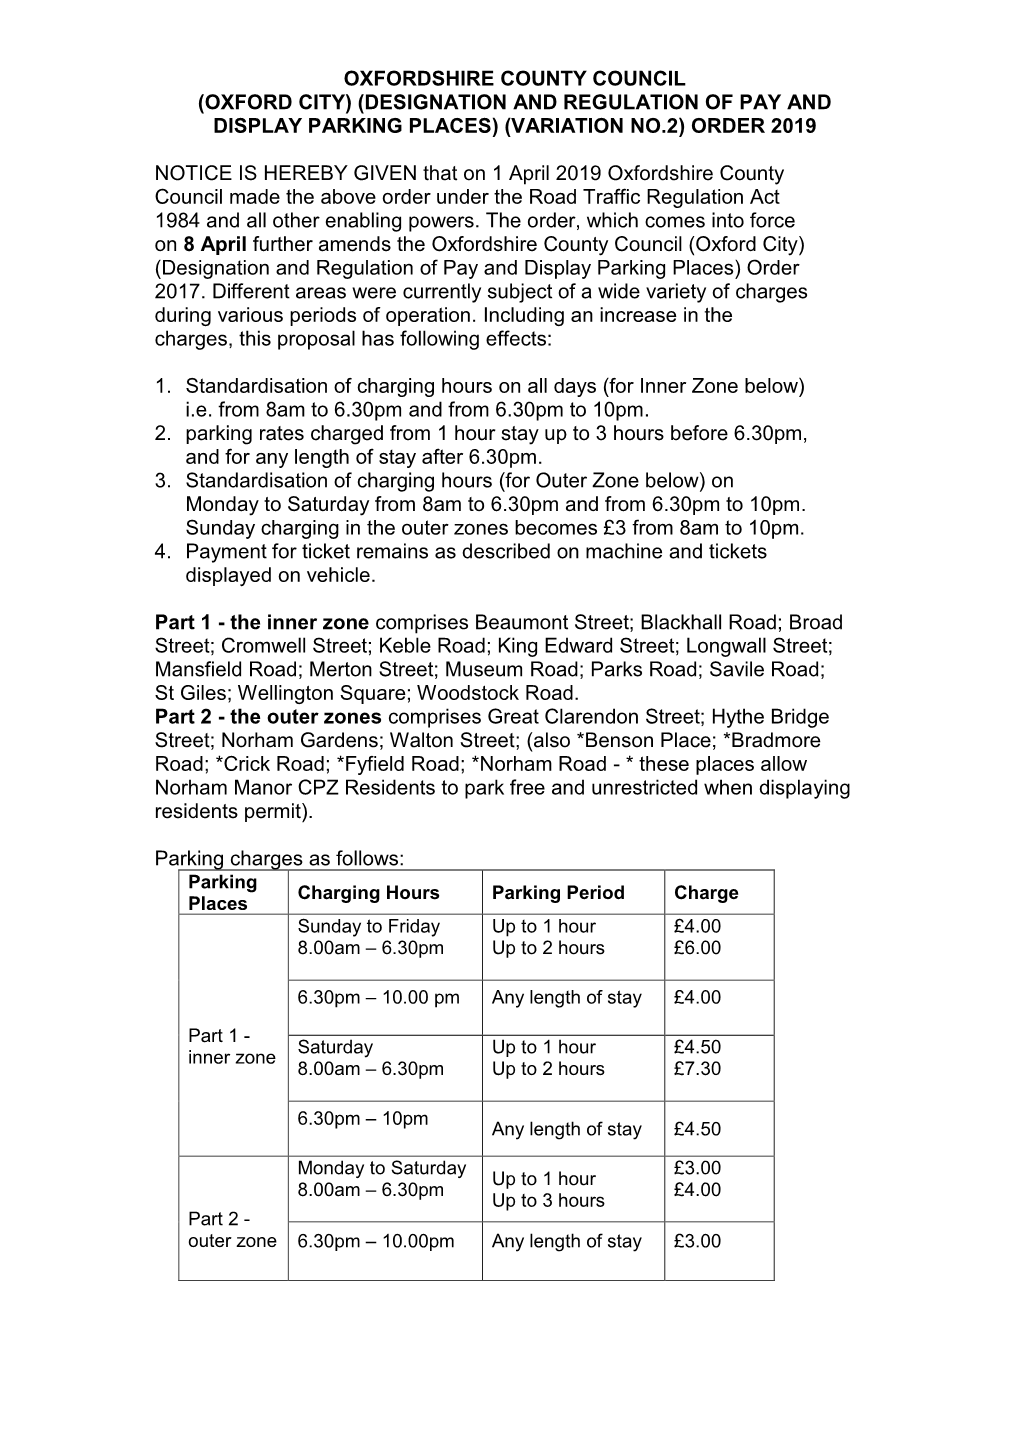 (Oxford City) (Designation and Regulation of Pay and Display Parking Places) (Variation No.2) Order 2019